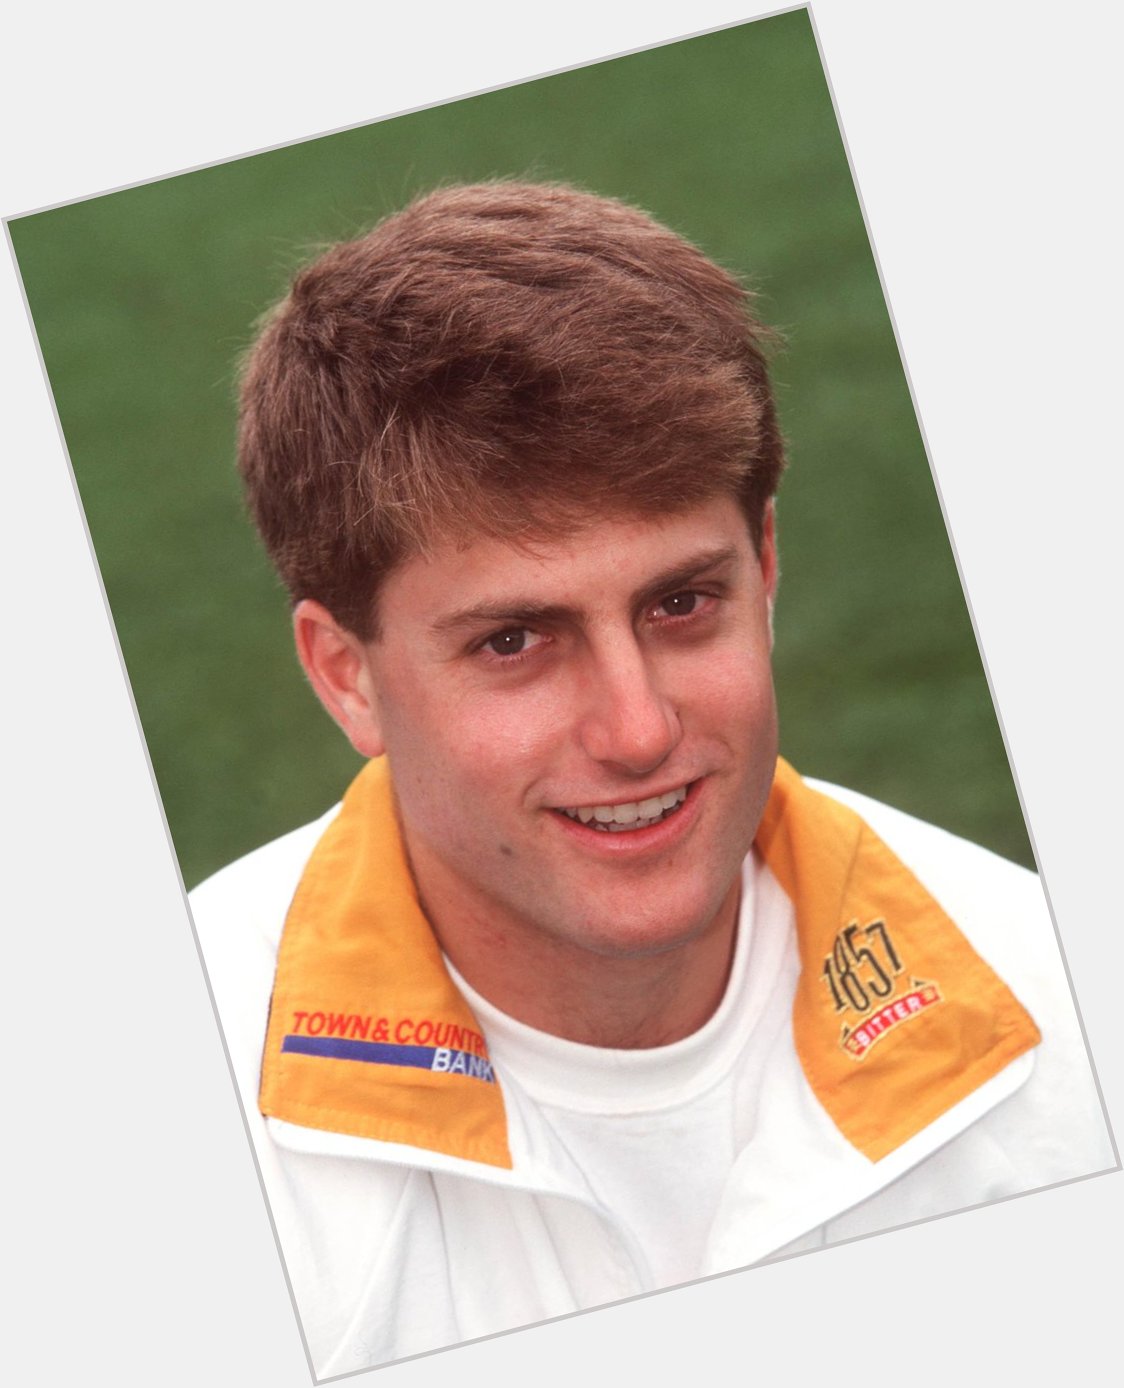 Join us in wishing former WA legend Simon Katich a happy birthday! He turns 40 today! 